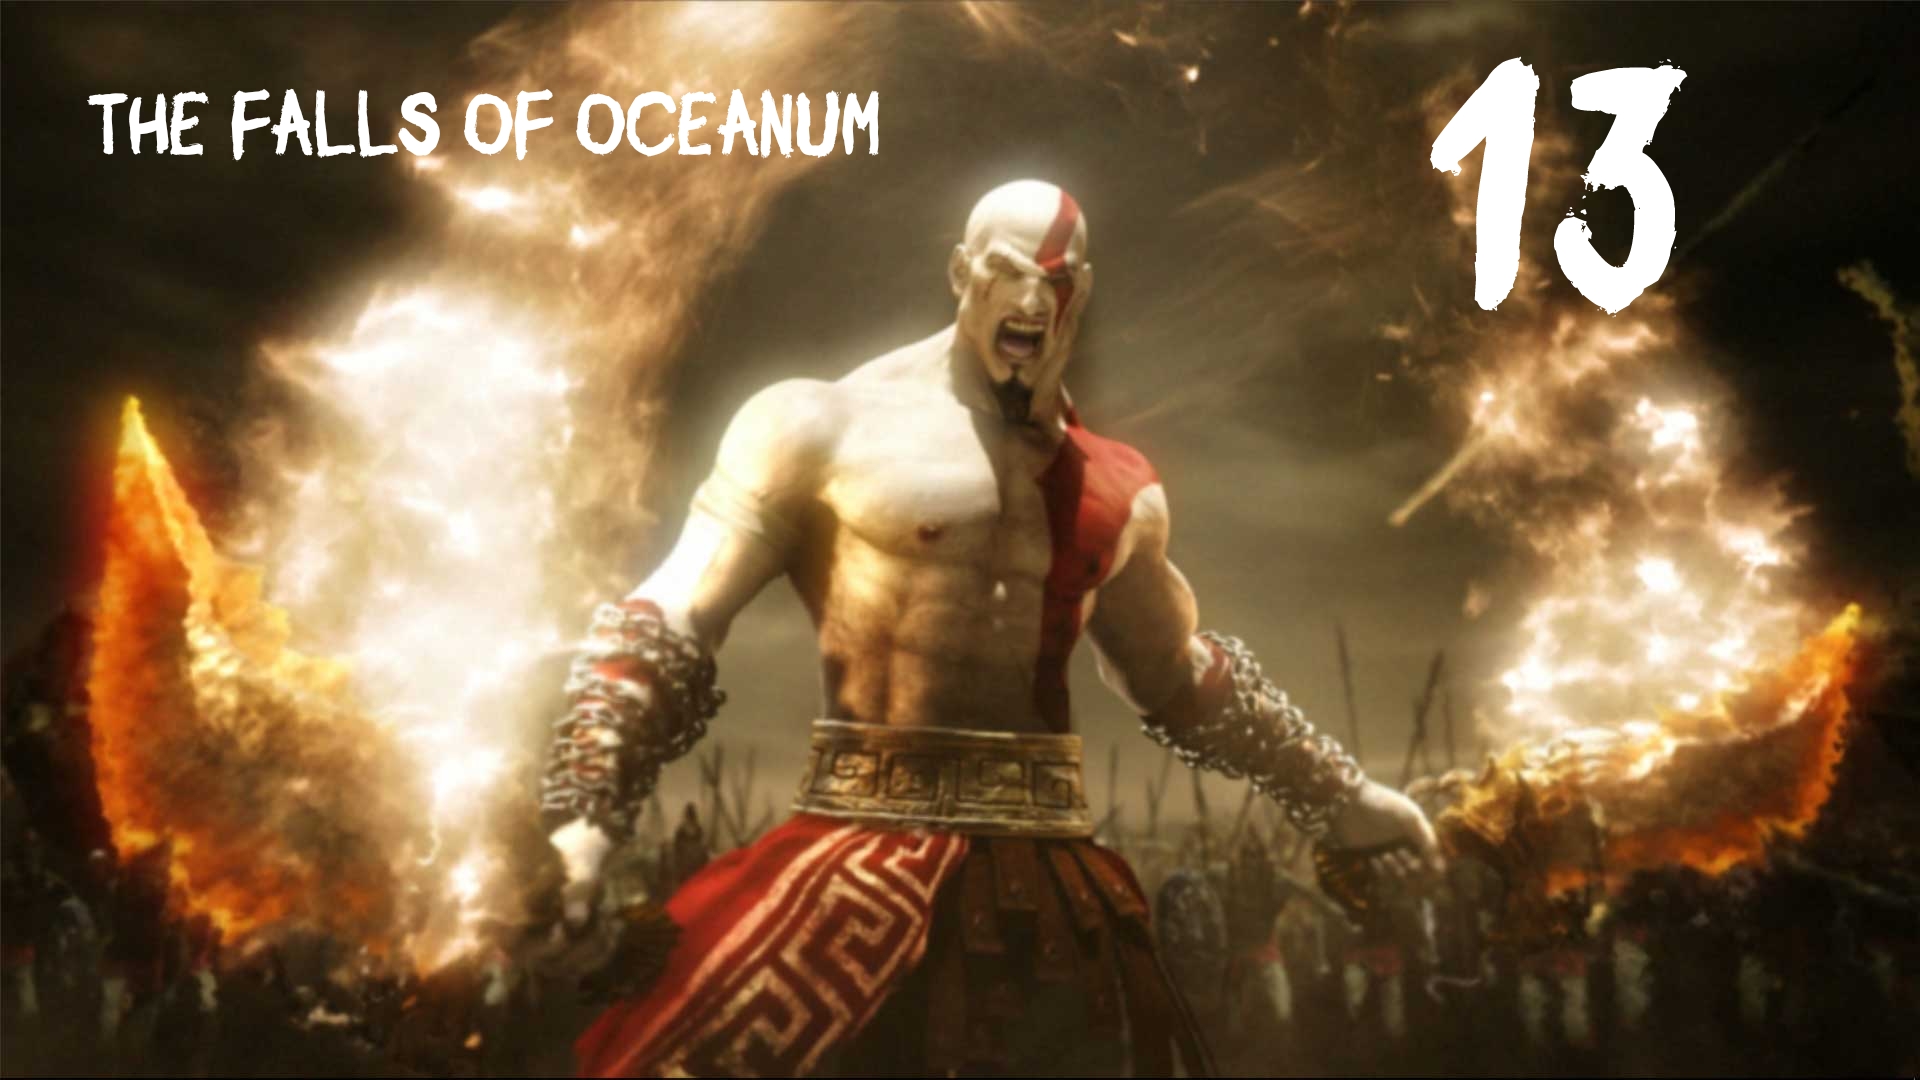 God of War: Chains of Olympus HD Водопады Океана